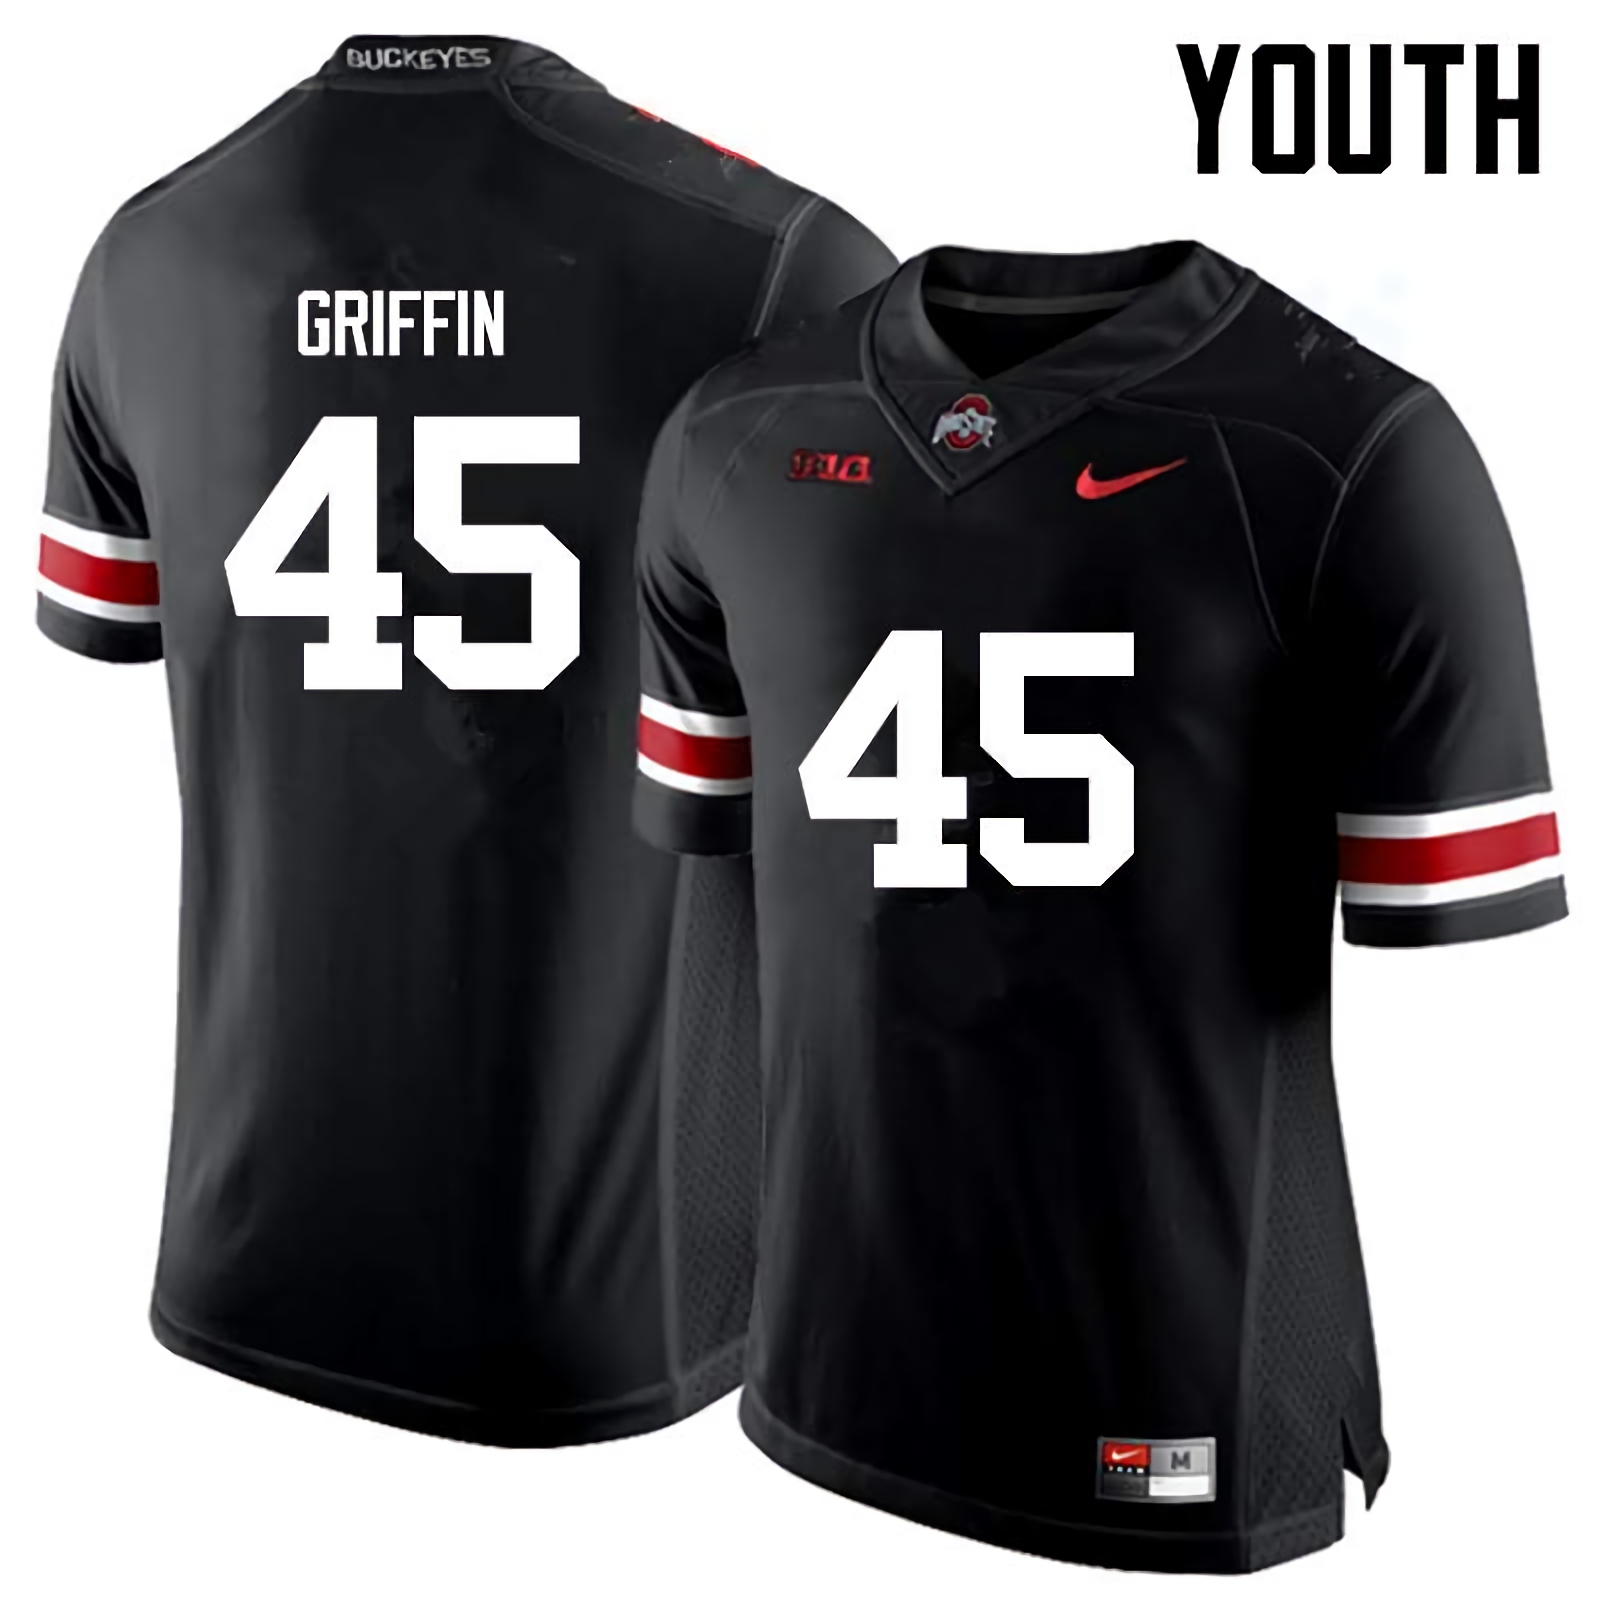 Archie Griffin Ohio State Buckeyes Youth NCAA #45 Nike Black College Stitched Football Jersey HLY4456VY